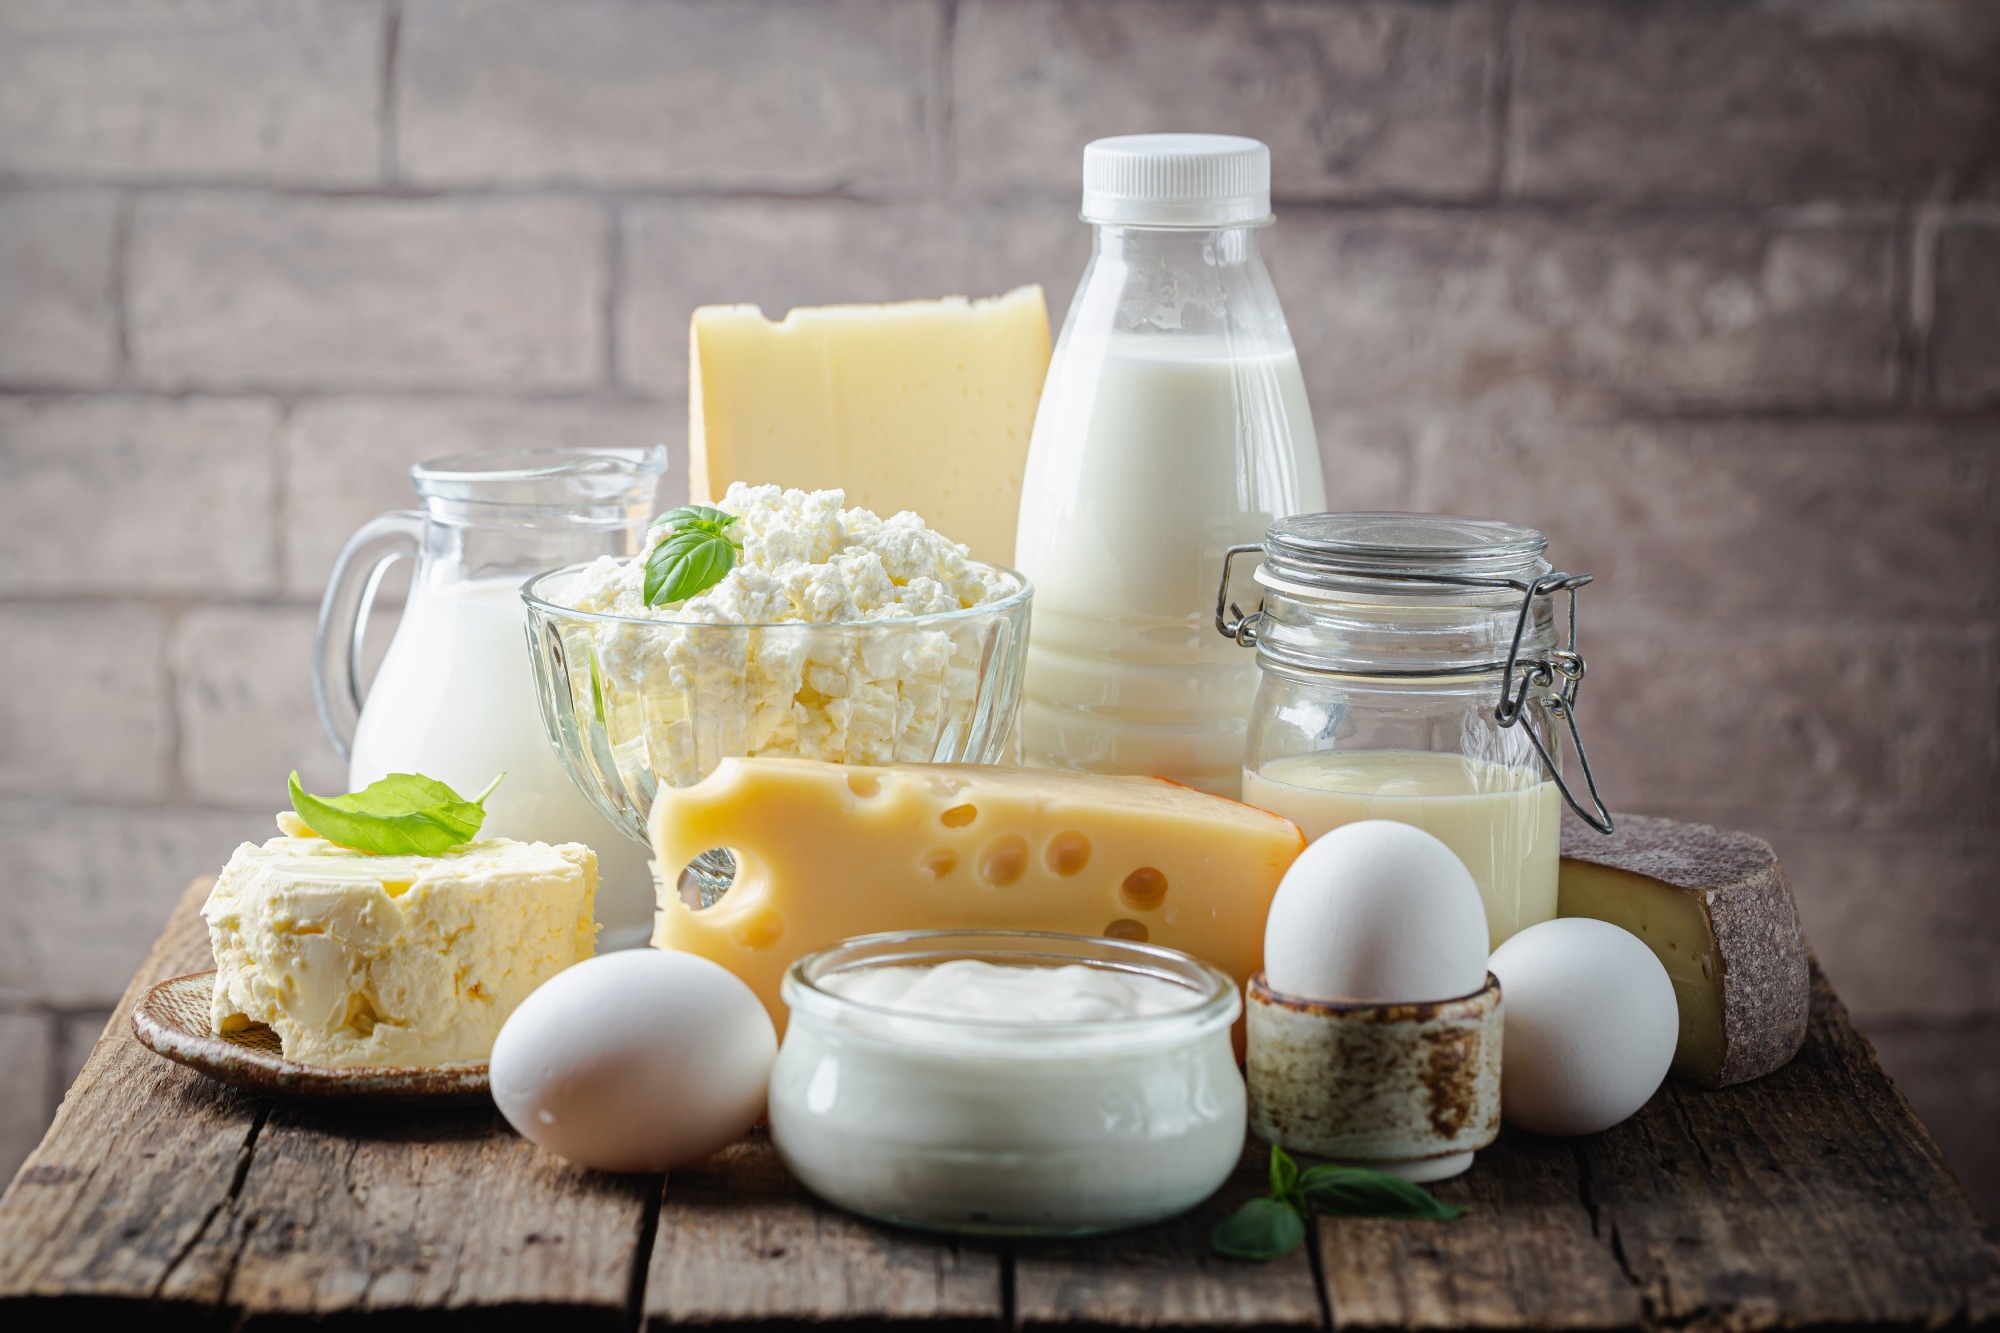 Study: No Associations between Dairy Intake and Markers of Gastrointestinal Inflammation in Healthy Adult Cohort. Image Credit: GoskovaTatiana/Shutterstock.com